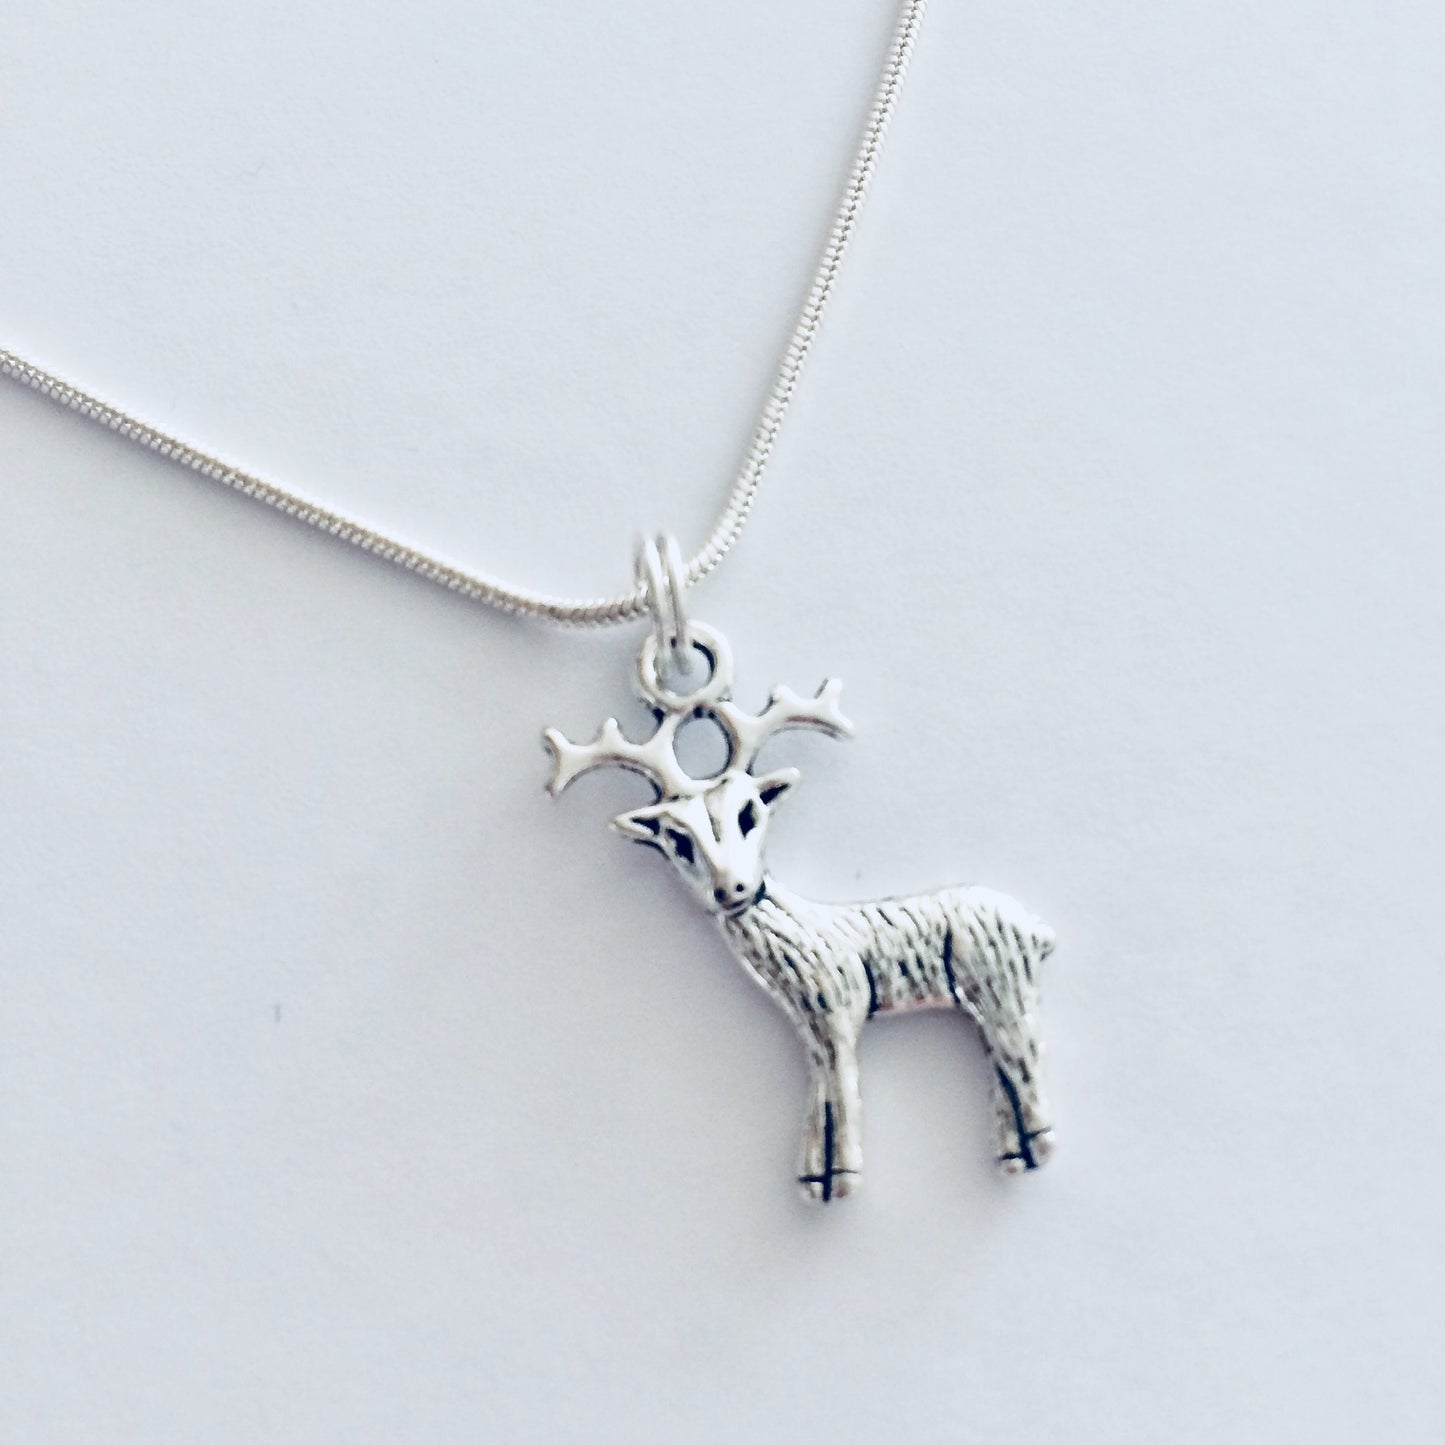 Stag Necklace, Deer Necklace, Woodland Necklace, Deer Charm, Buck Necklace, Gift For Her, Forest Jewellery, Forest Jewelry, Stag Charm.